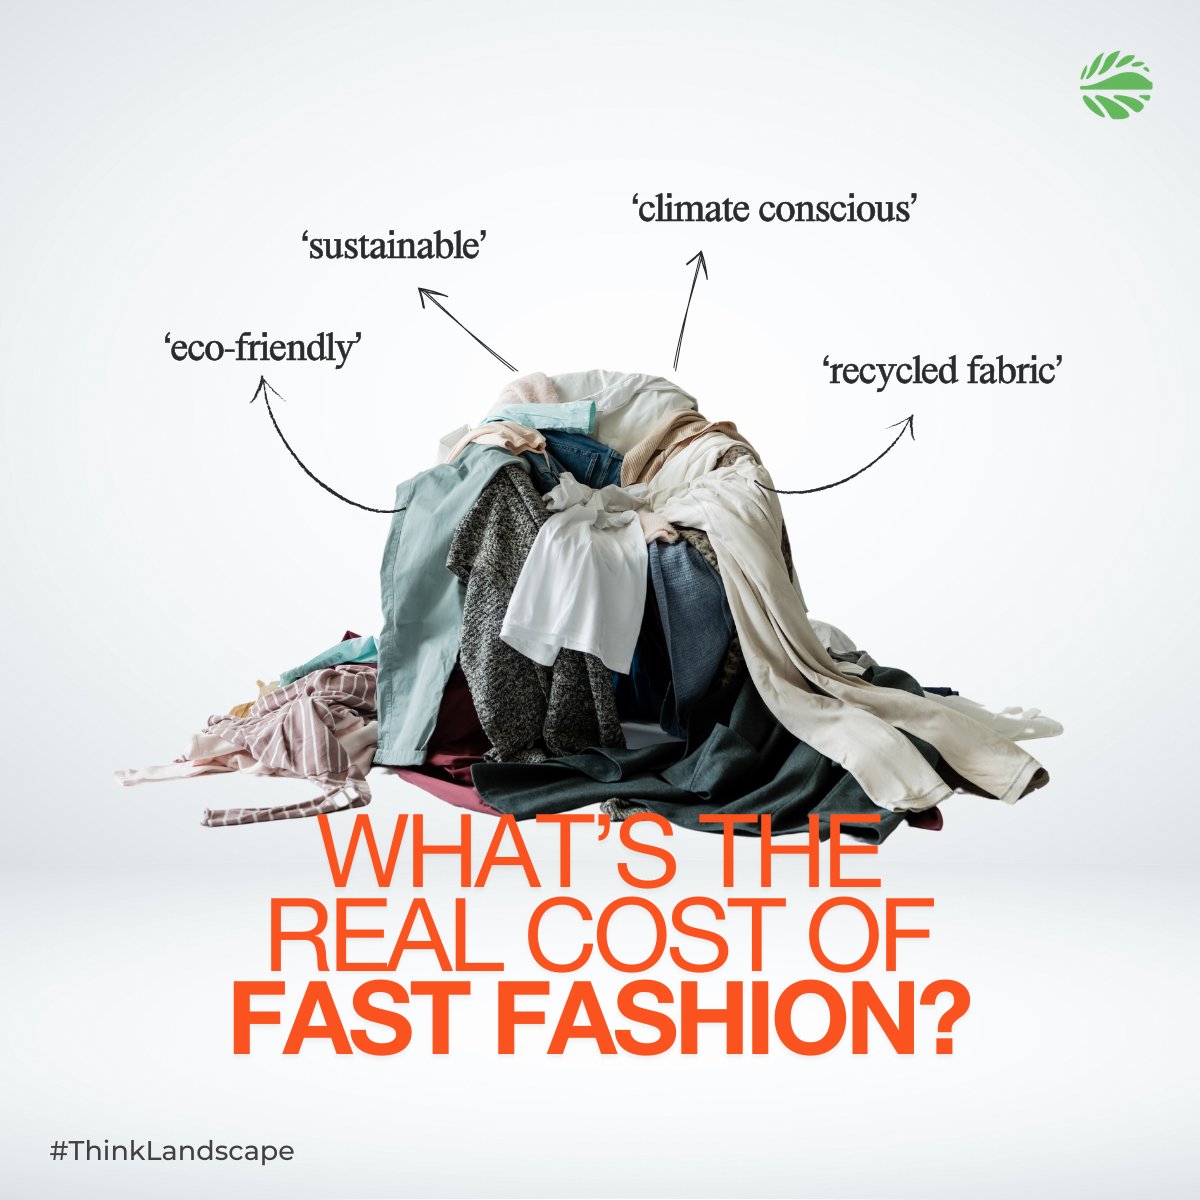 Ever wondered about the true cost behind your fashion choices? 🏭 With the #fashion industry contributing an estimated 2 to 8% of global greenhouse gas emissions, can we trust their eco-friendly claims? Read the full story: bit.ly/49nndTq #ThinkLandscape